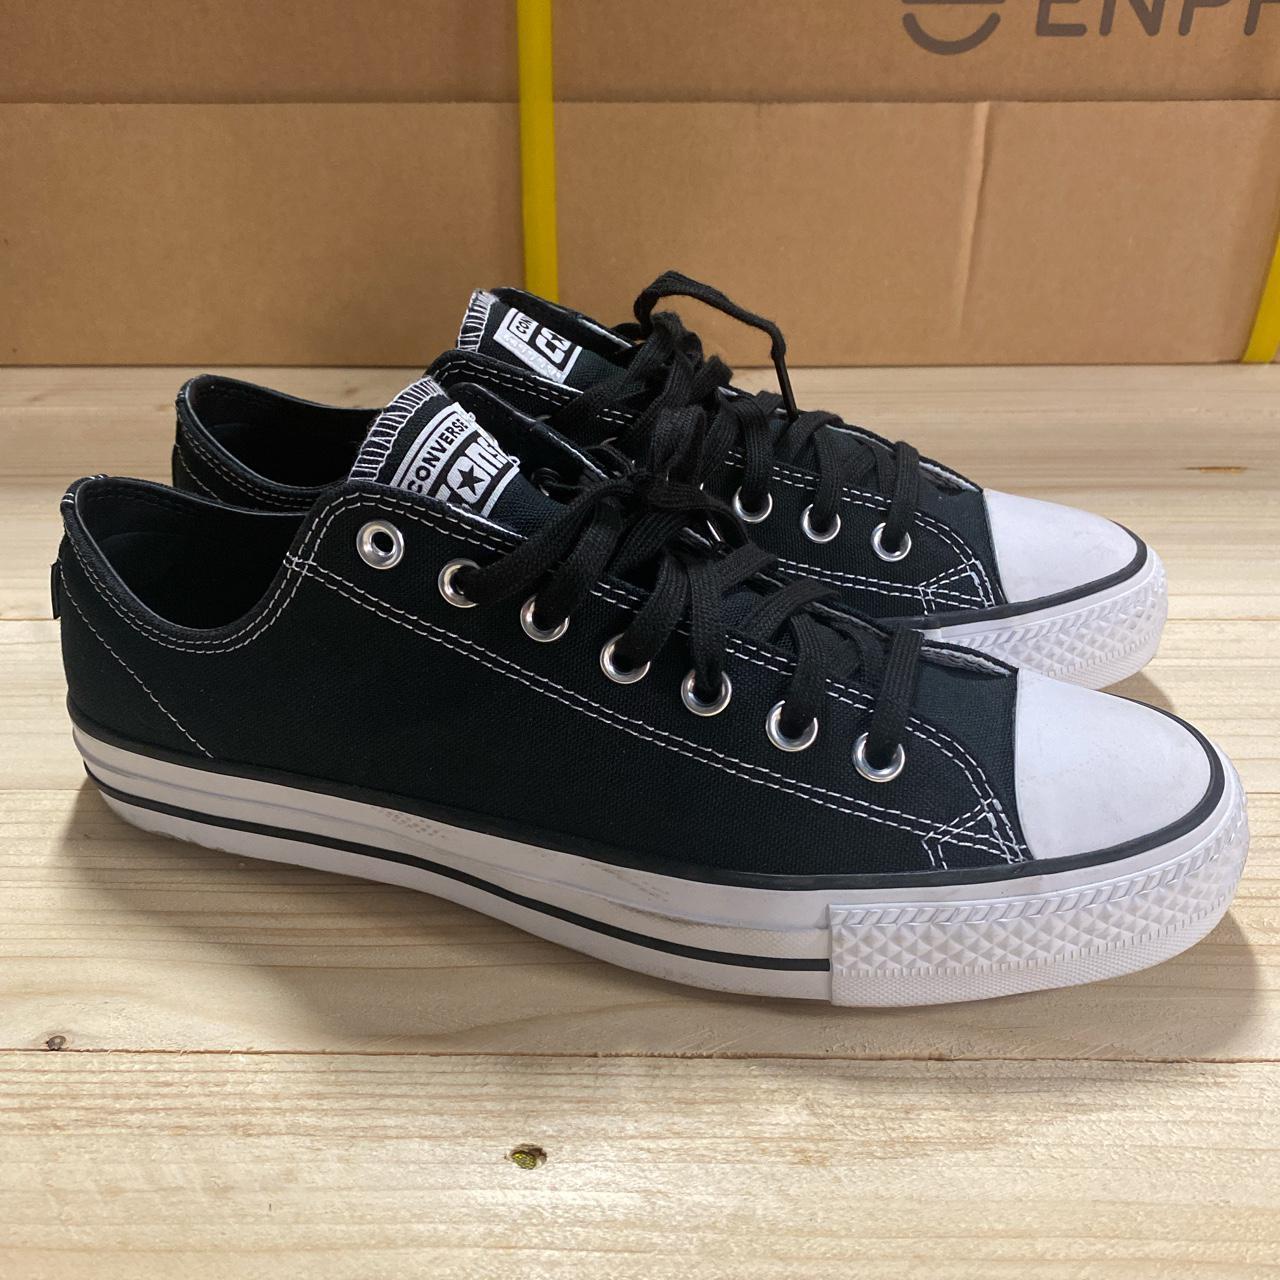 Product Image 1 - Converse cons cts pro
Size 9.5
Pretty